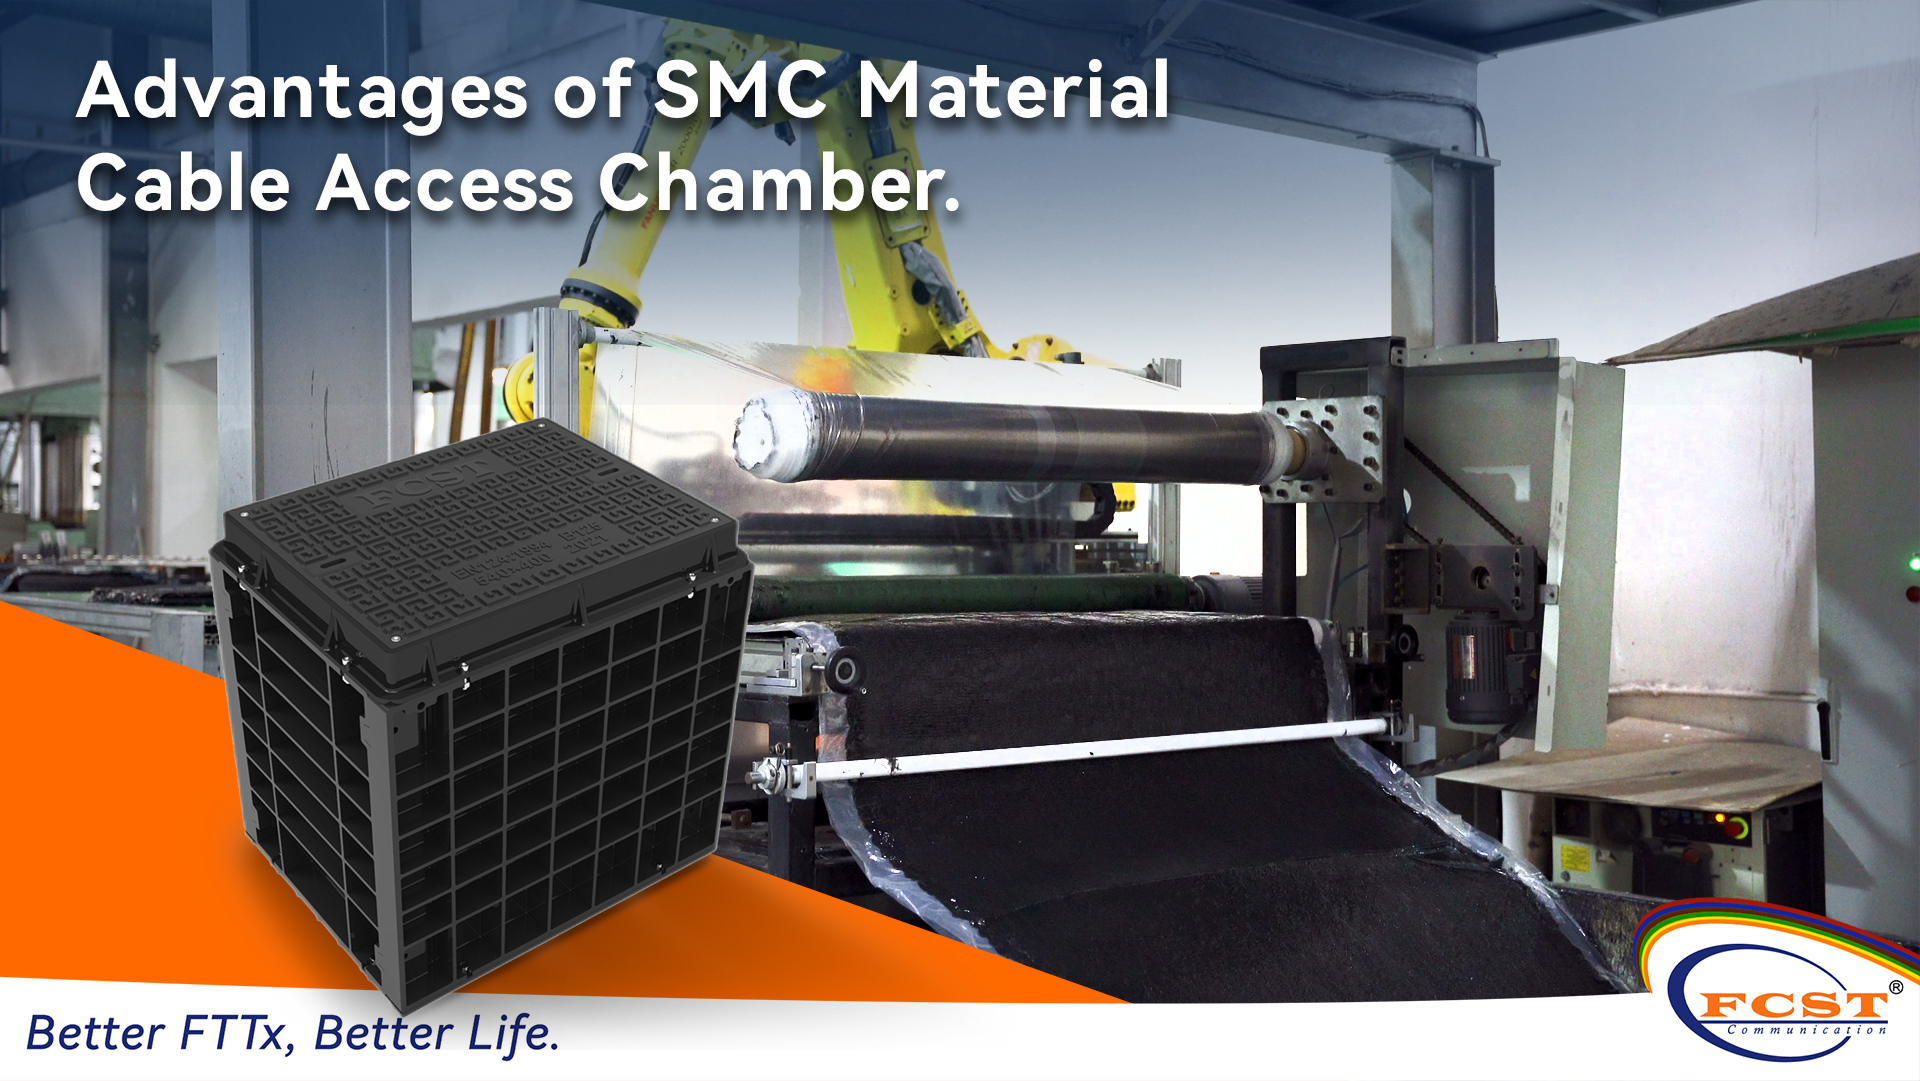 Advantages of SMC Material Cable Access Chamber